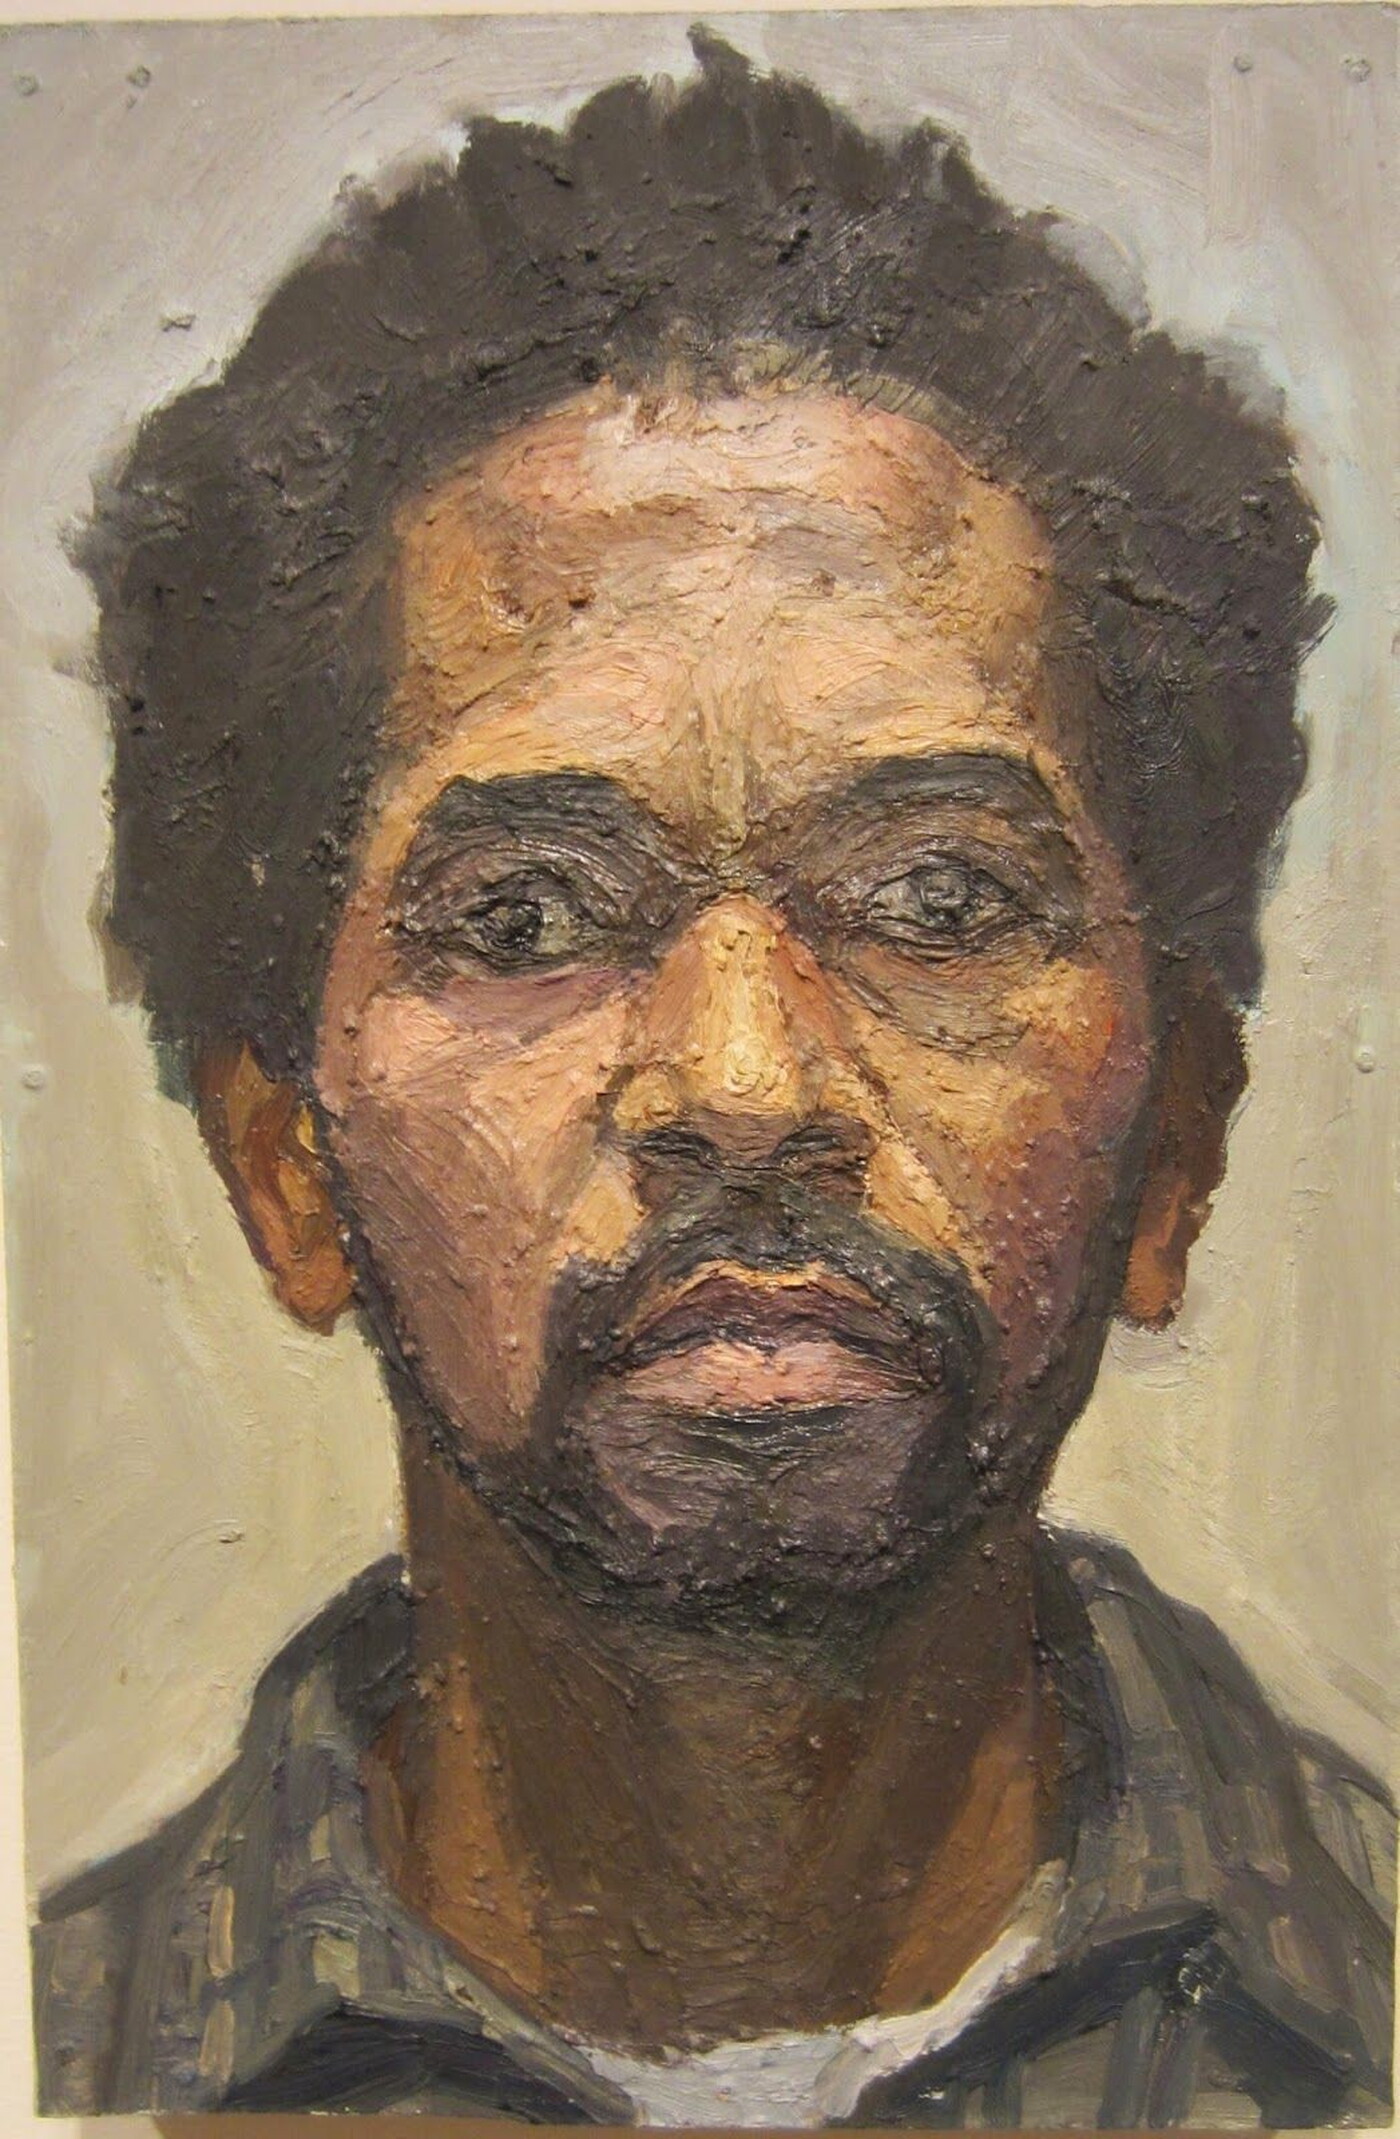 An oil painting of the head and shoulders of a Black man with short hair and a goatee.